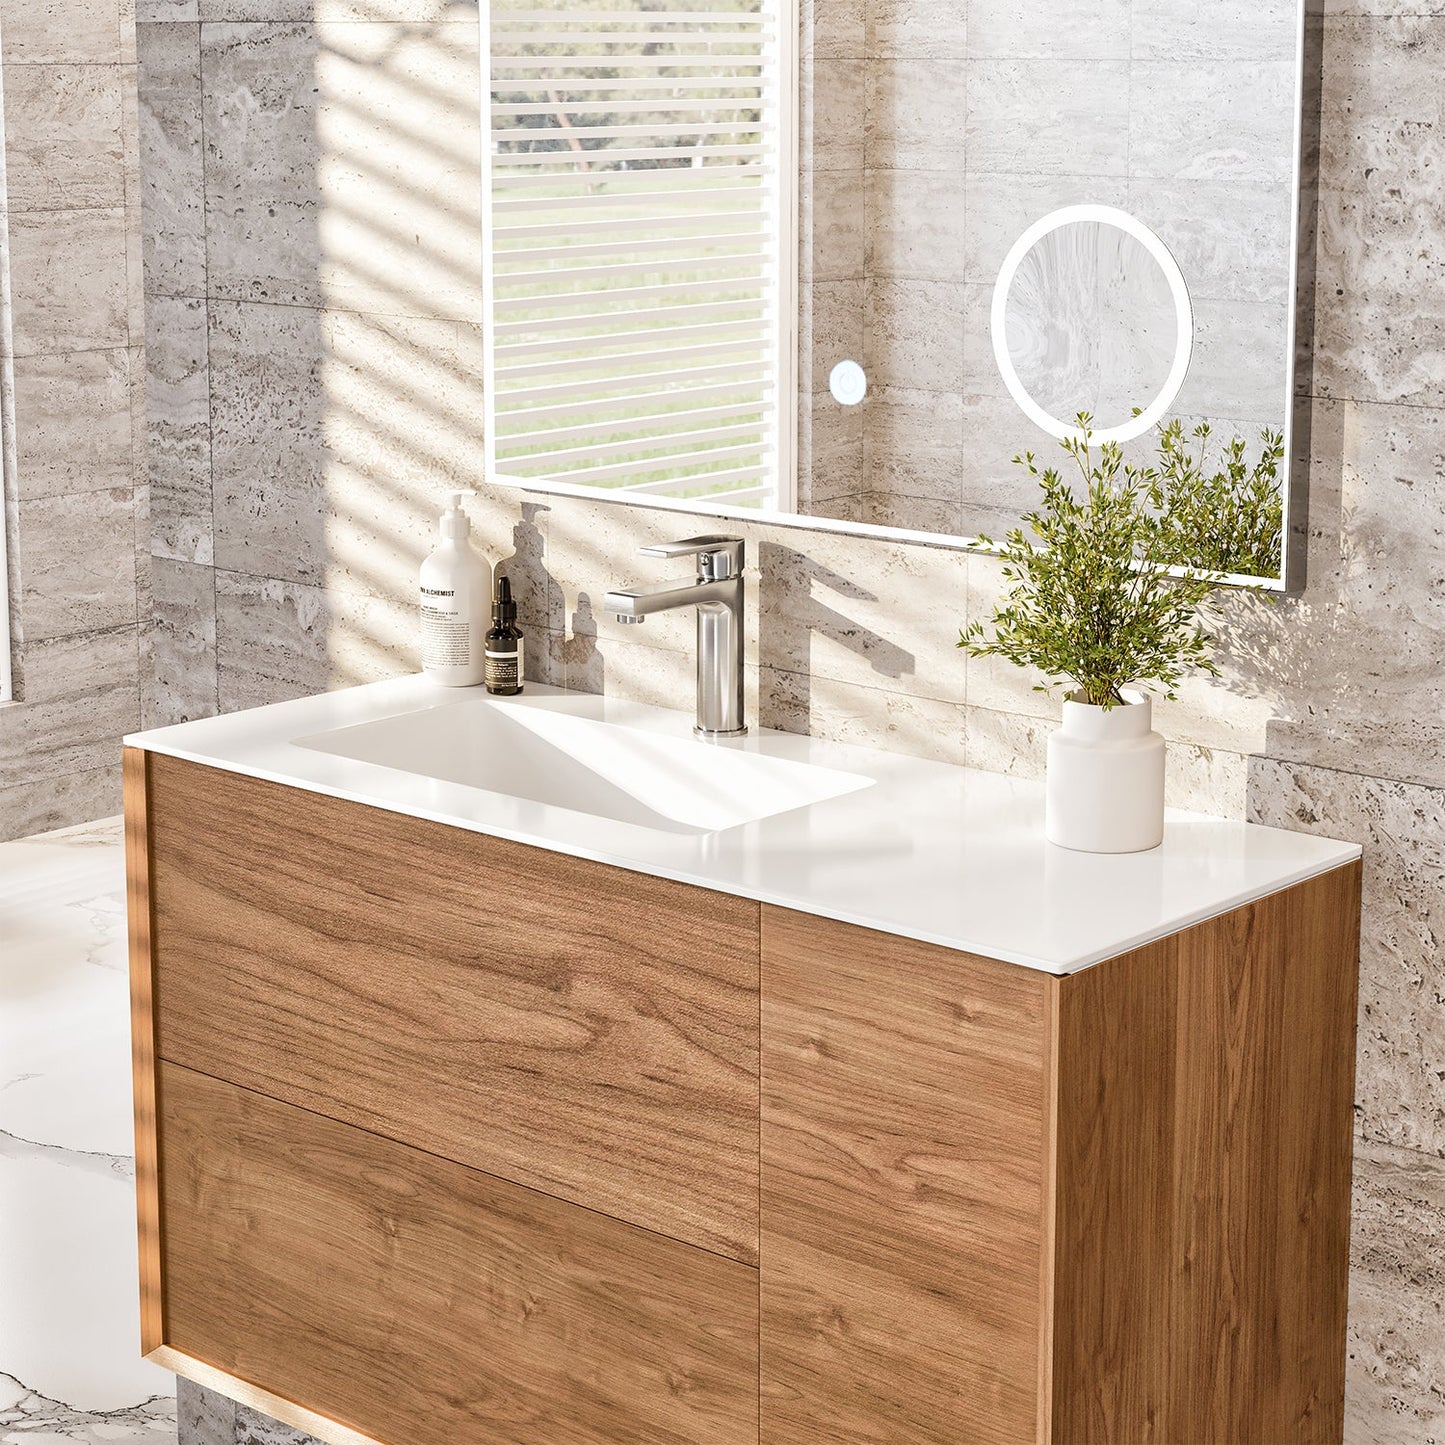 Prancer 44"W x 20"D Natural Oak Bathroom Vanity with Solid Surface Countertop and Integrated Sink